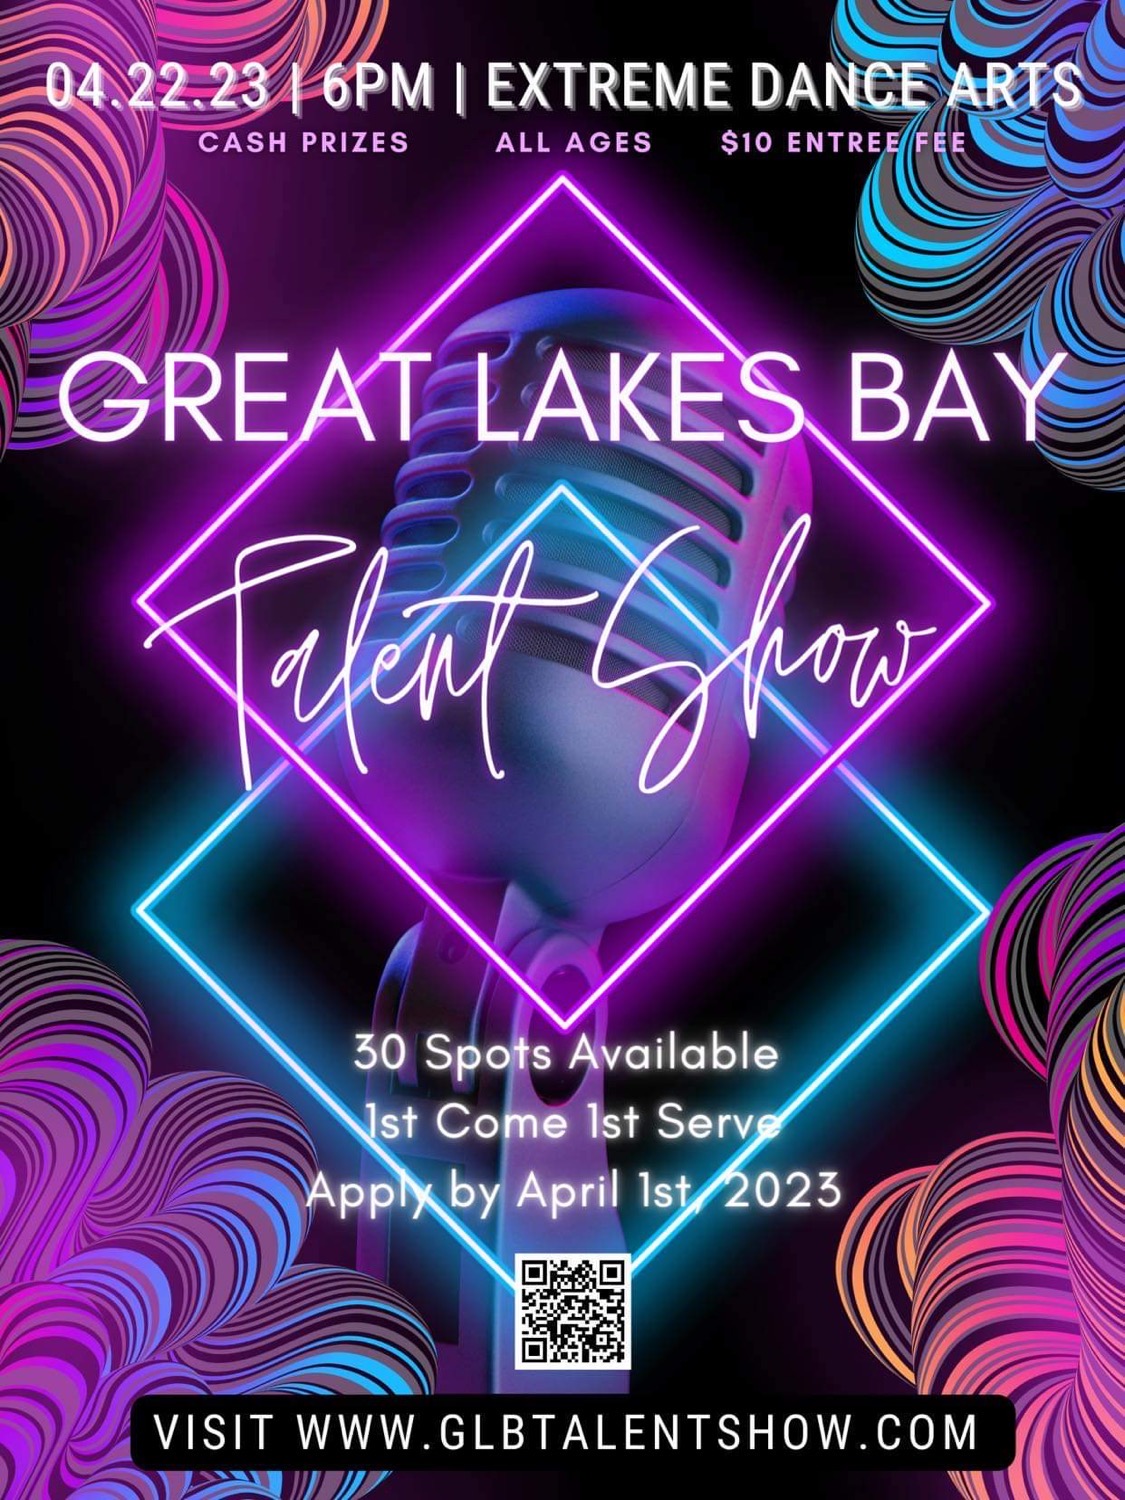 <h1 class="tribe-events-single-event-title">Great Lakes Bay Talent Show</h1>